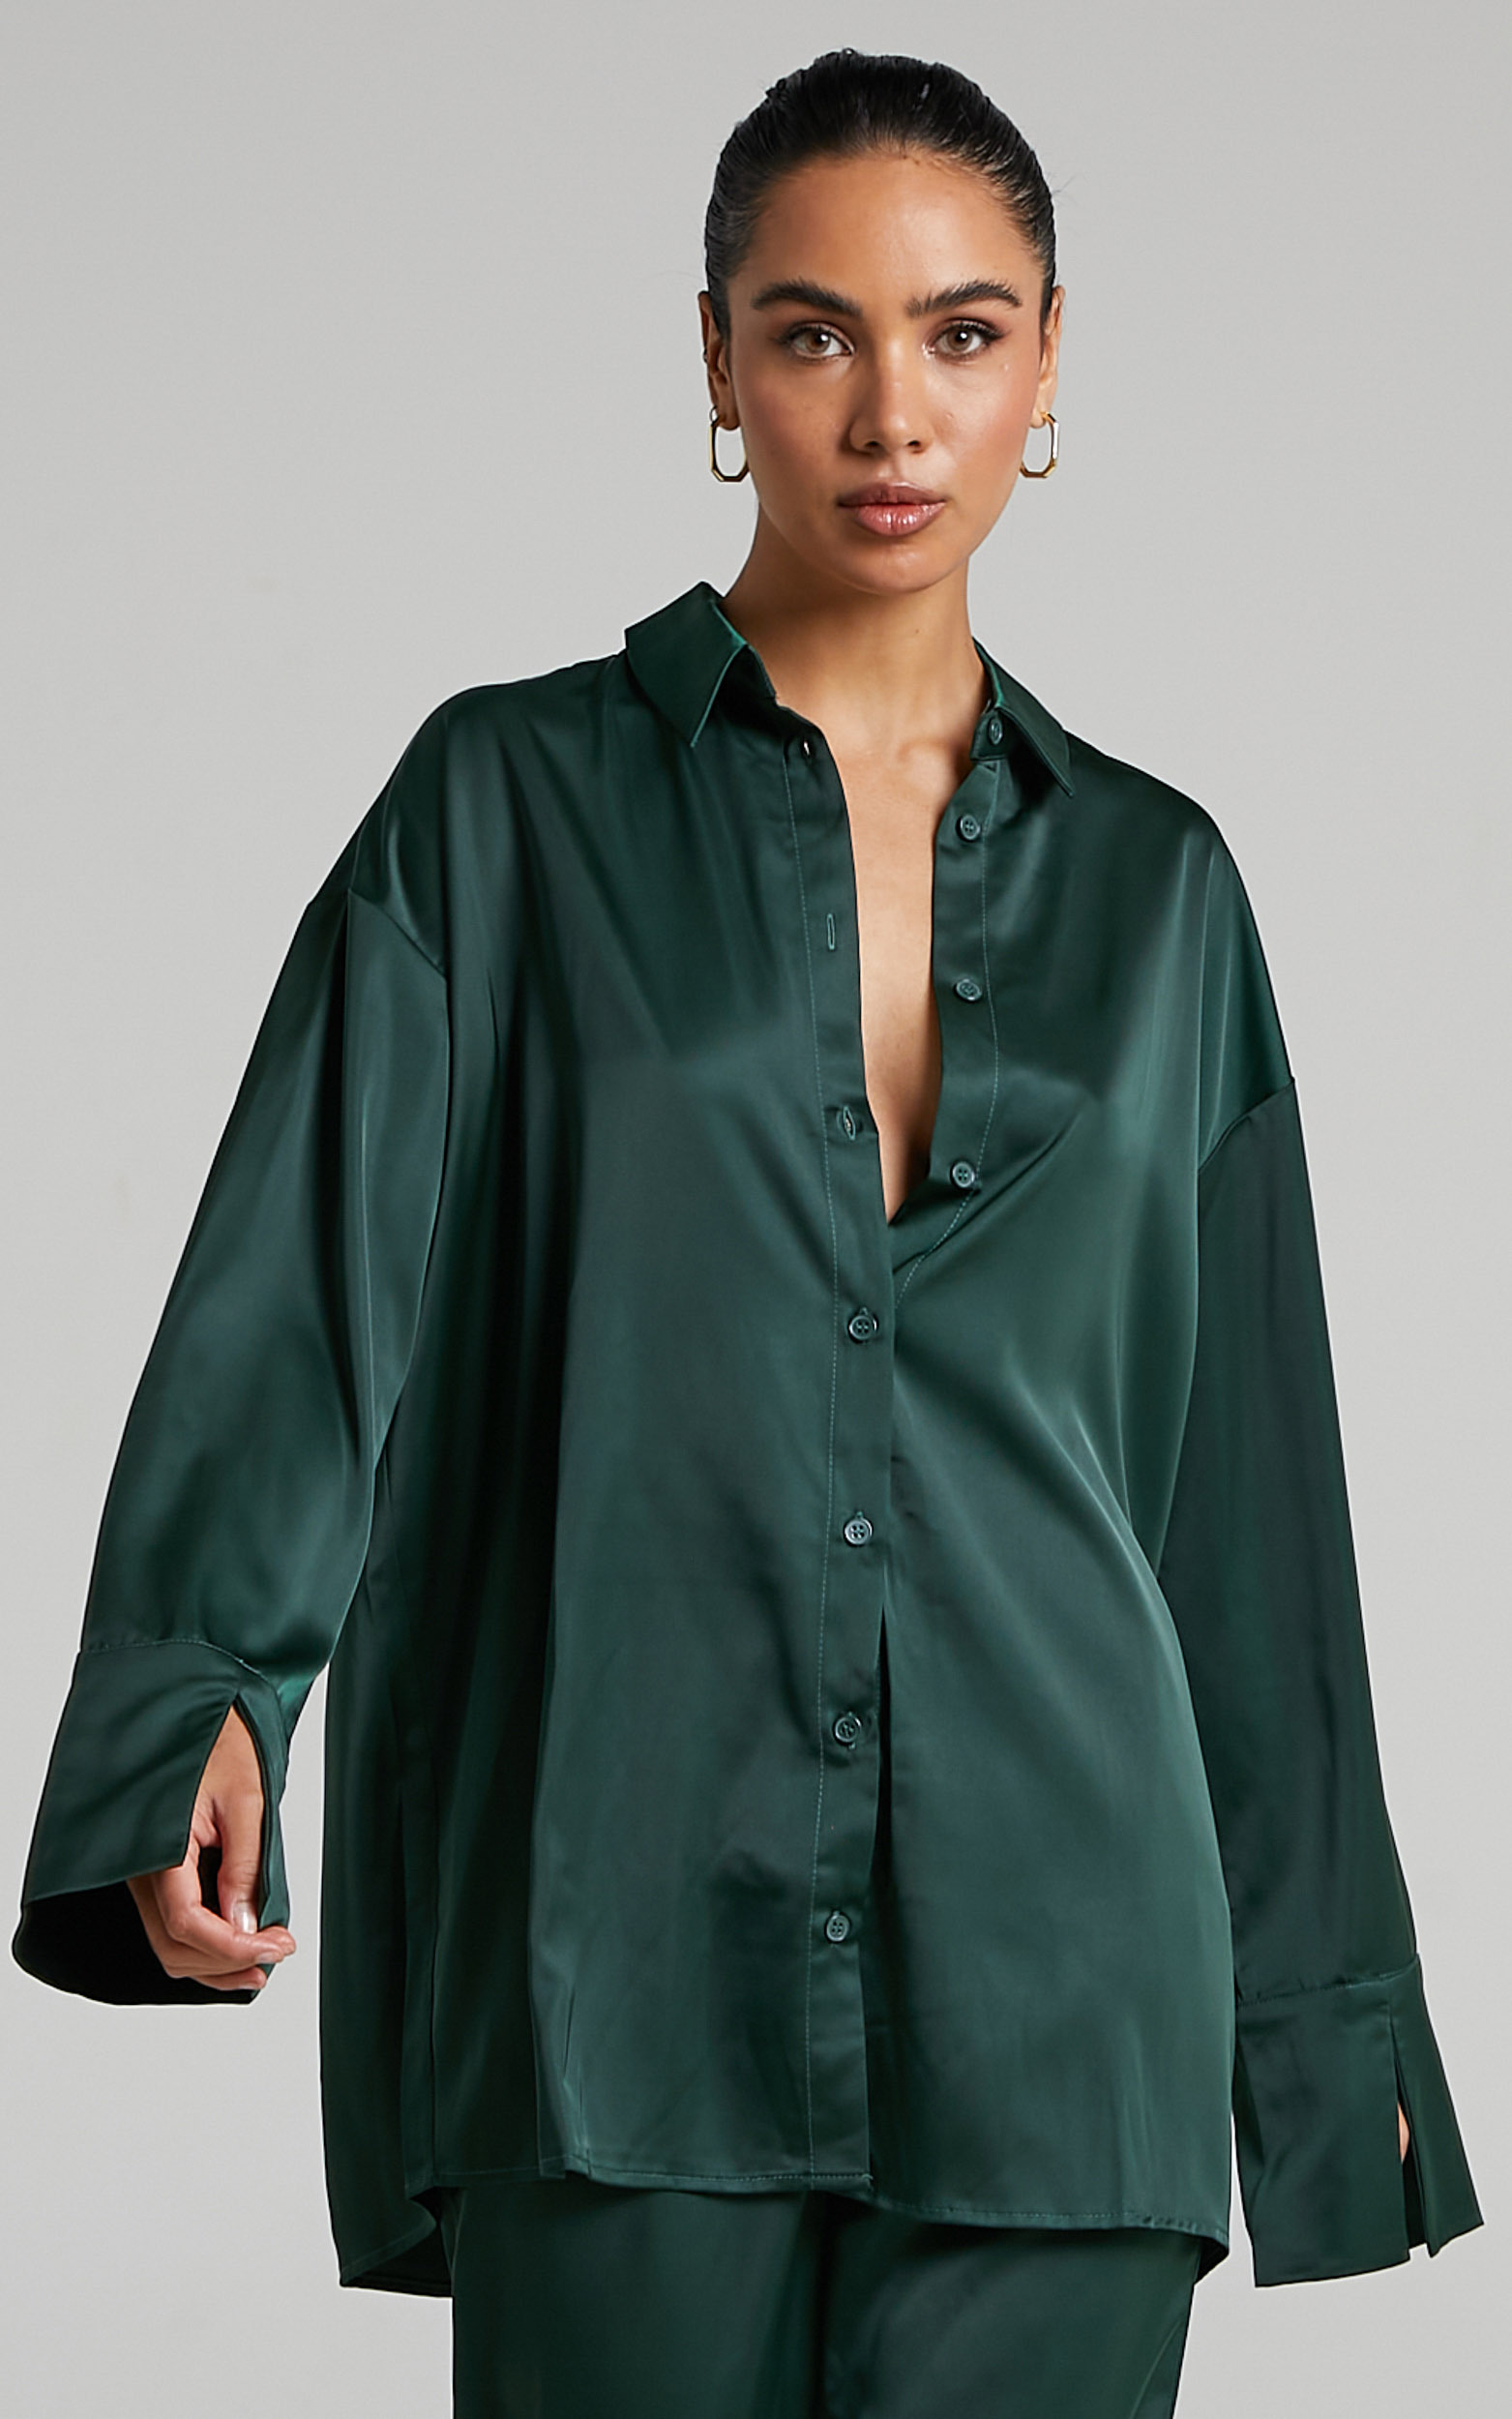 4th & Reckless - Elina Satin Shirt in Forest Green - 06, GRN1, hi-res image number null